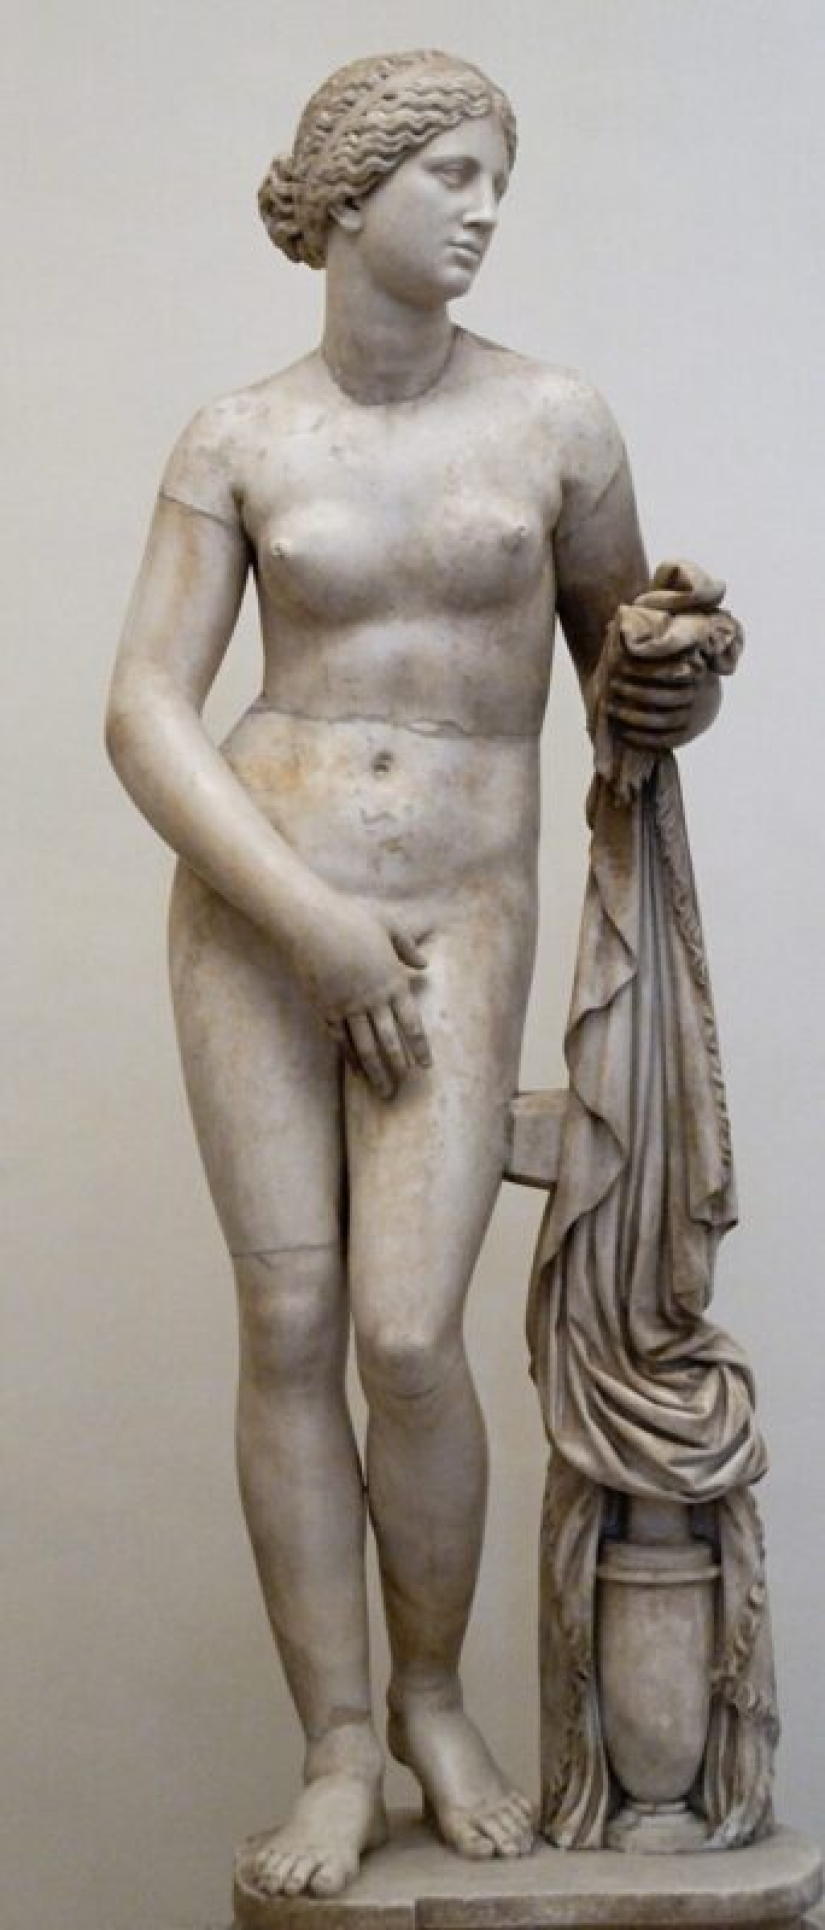 The statue of Aphrodite of Cnida is so realistic that she was once raped